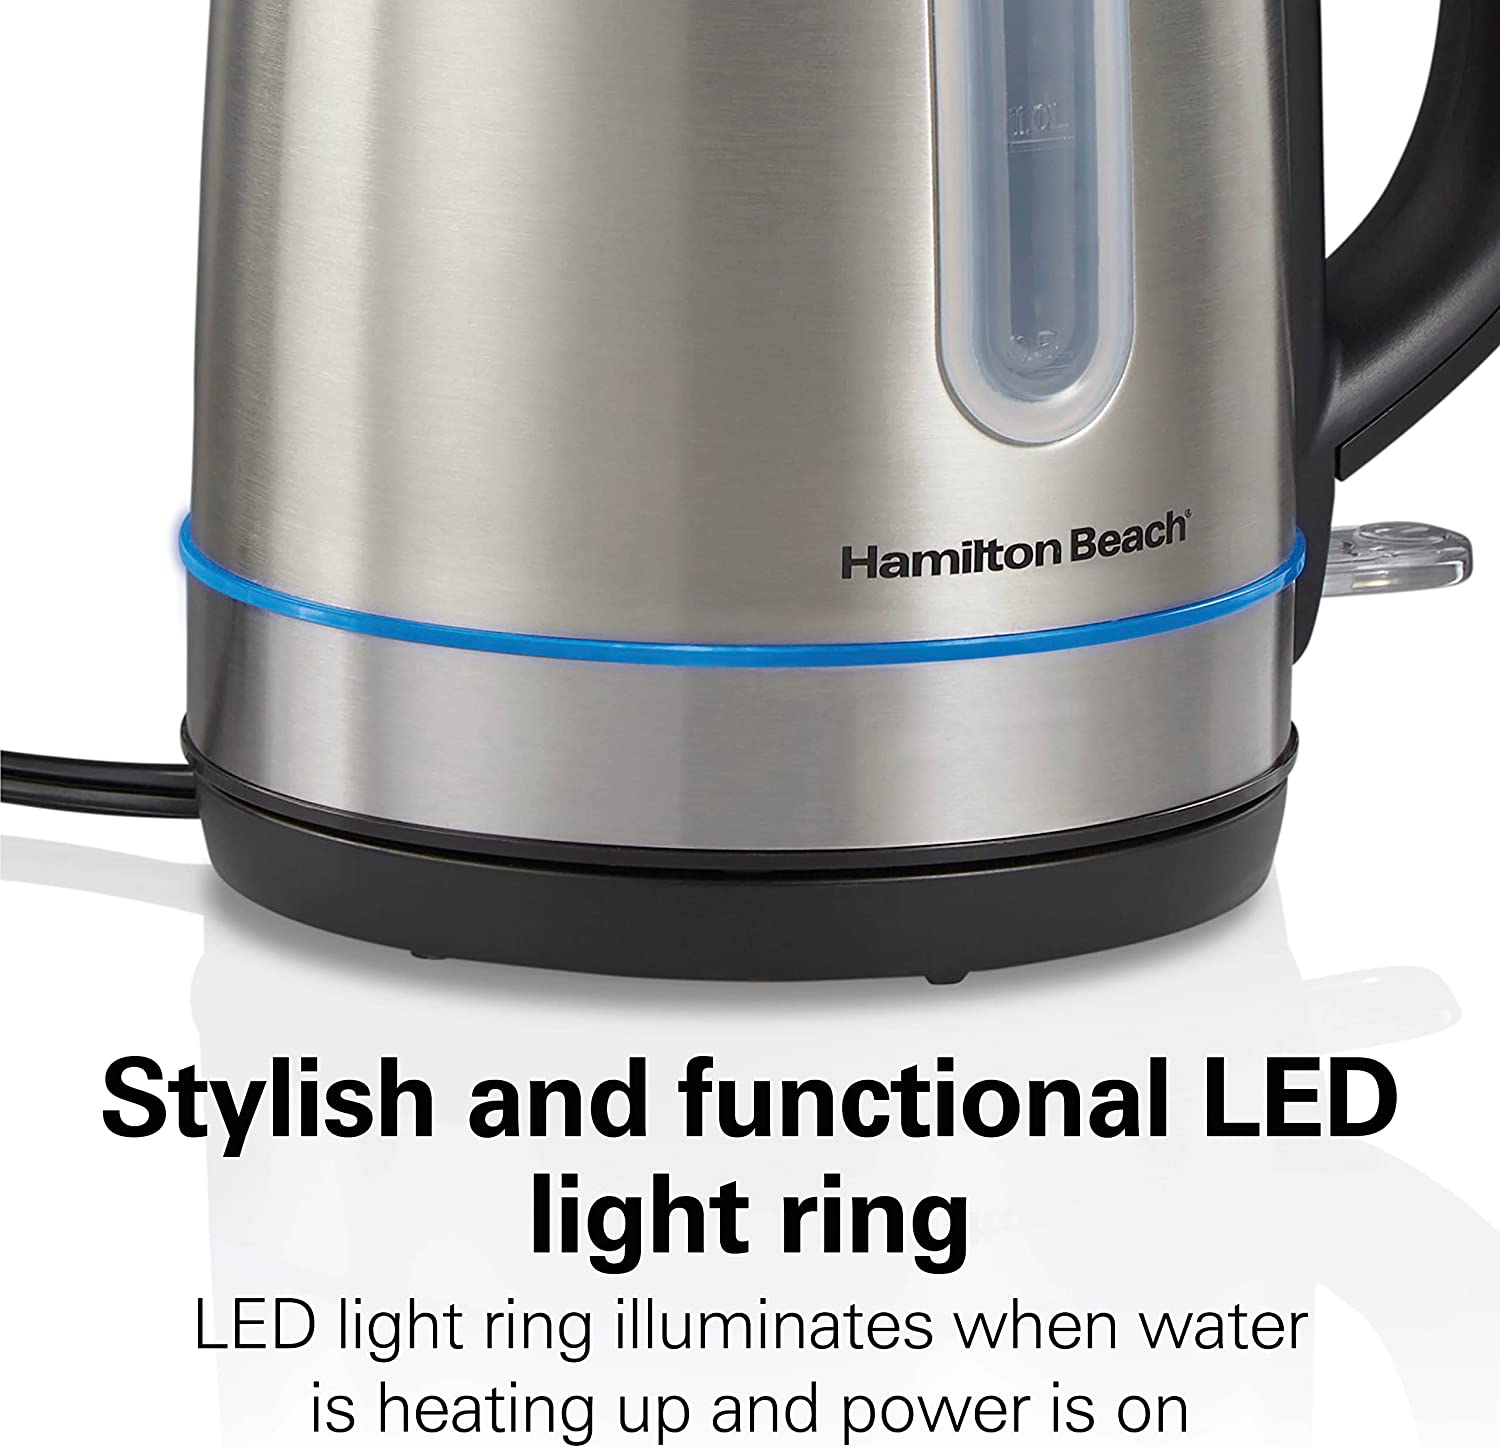 https://bigbigmart.com/wp-content/uploads/2023/07/Hamilton-Beach-Electric-Tea-Kettle-Water-Boiler-Heater-1.7-Liter-Cordless-Serving-1500-Watts-for-Fast-Boiling-Auto-Shutoff-and-Boil-Dry-Protection-Stainless-Steel-with-LED-Light-Ring-410371.jpg